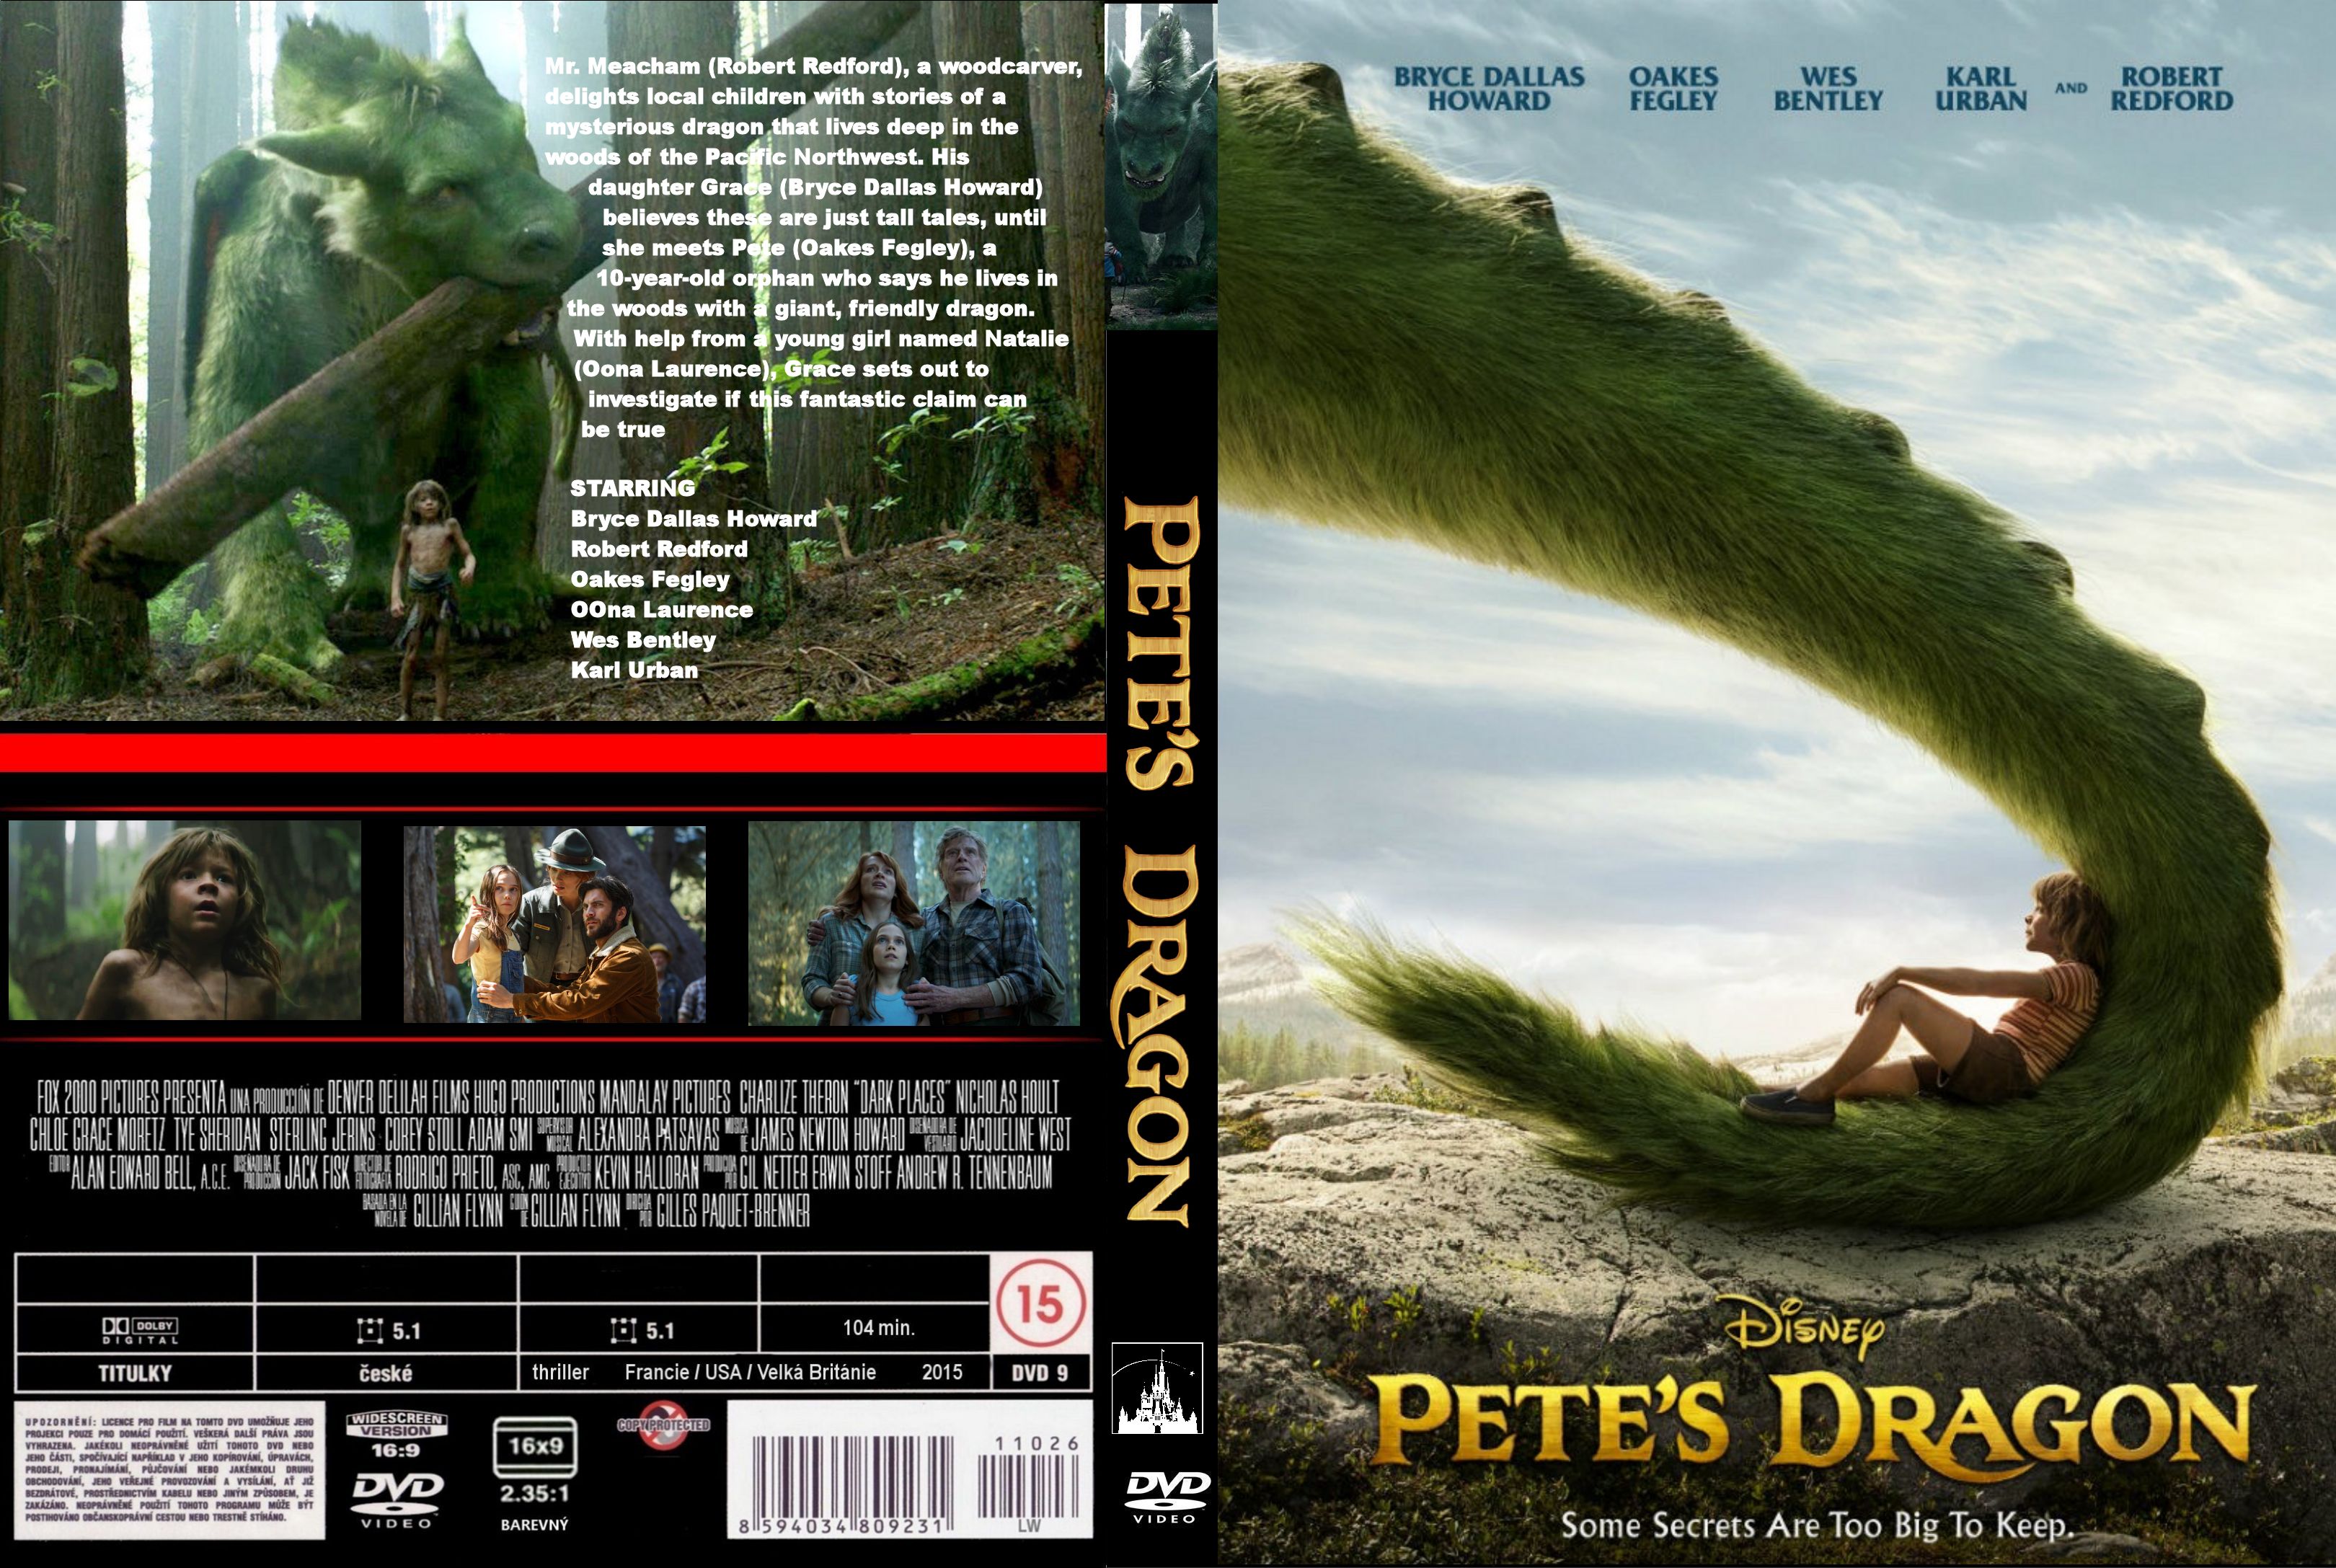 Petes Dragon 2016 R0 Covers Label 2.